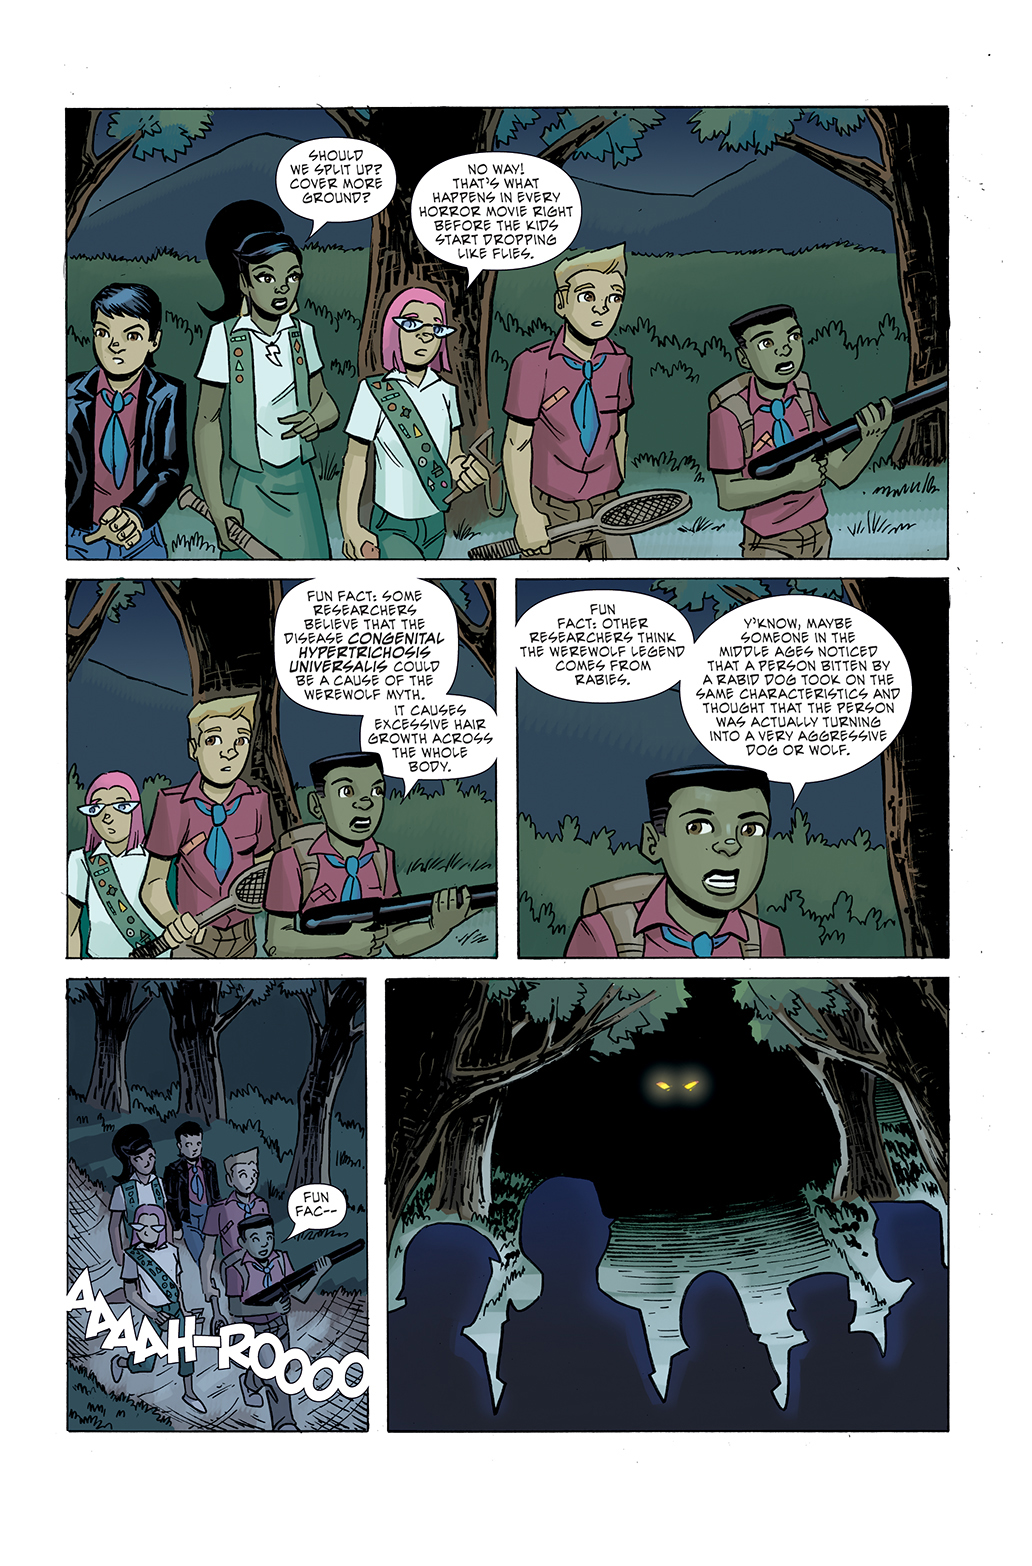 Ghoul Scouts Volume 2 #1 Page 19.jpg